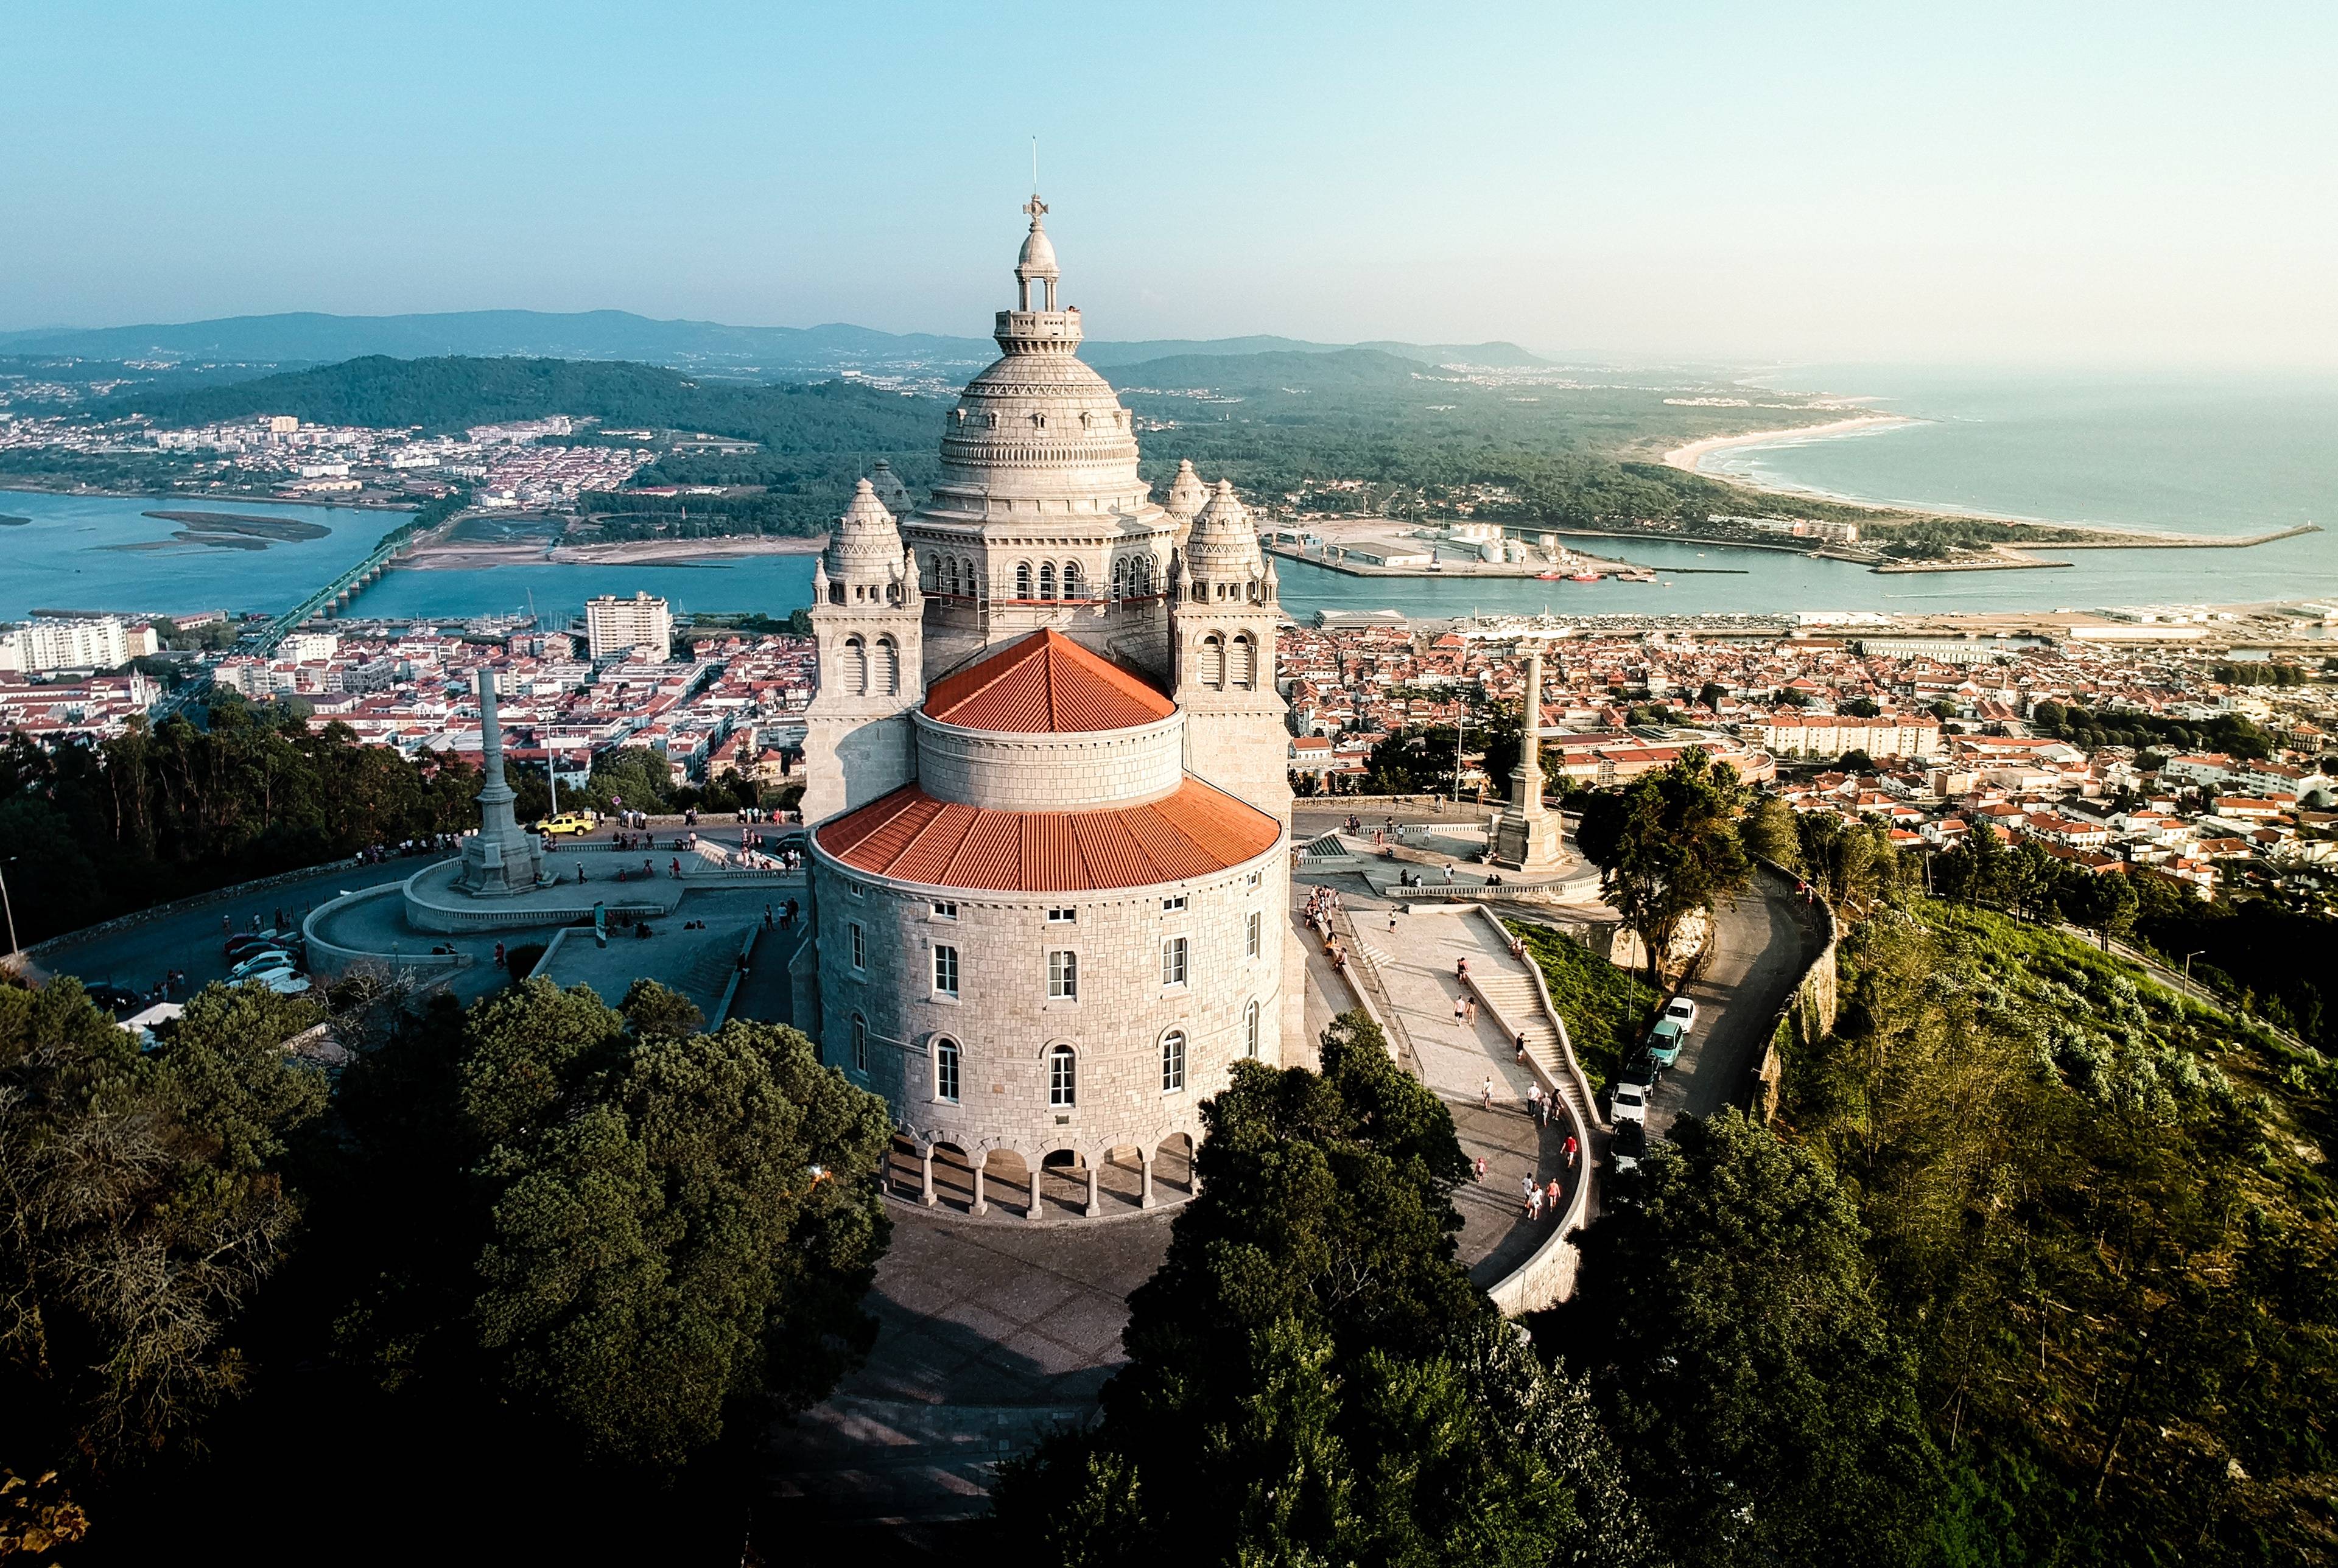 Viana do Castelo: Water Sports, Natural and Historical Sites